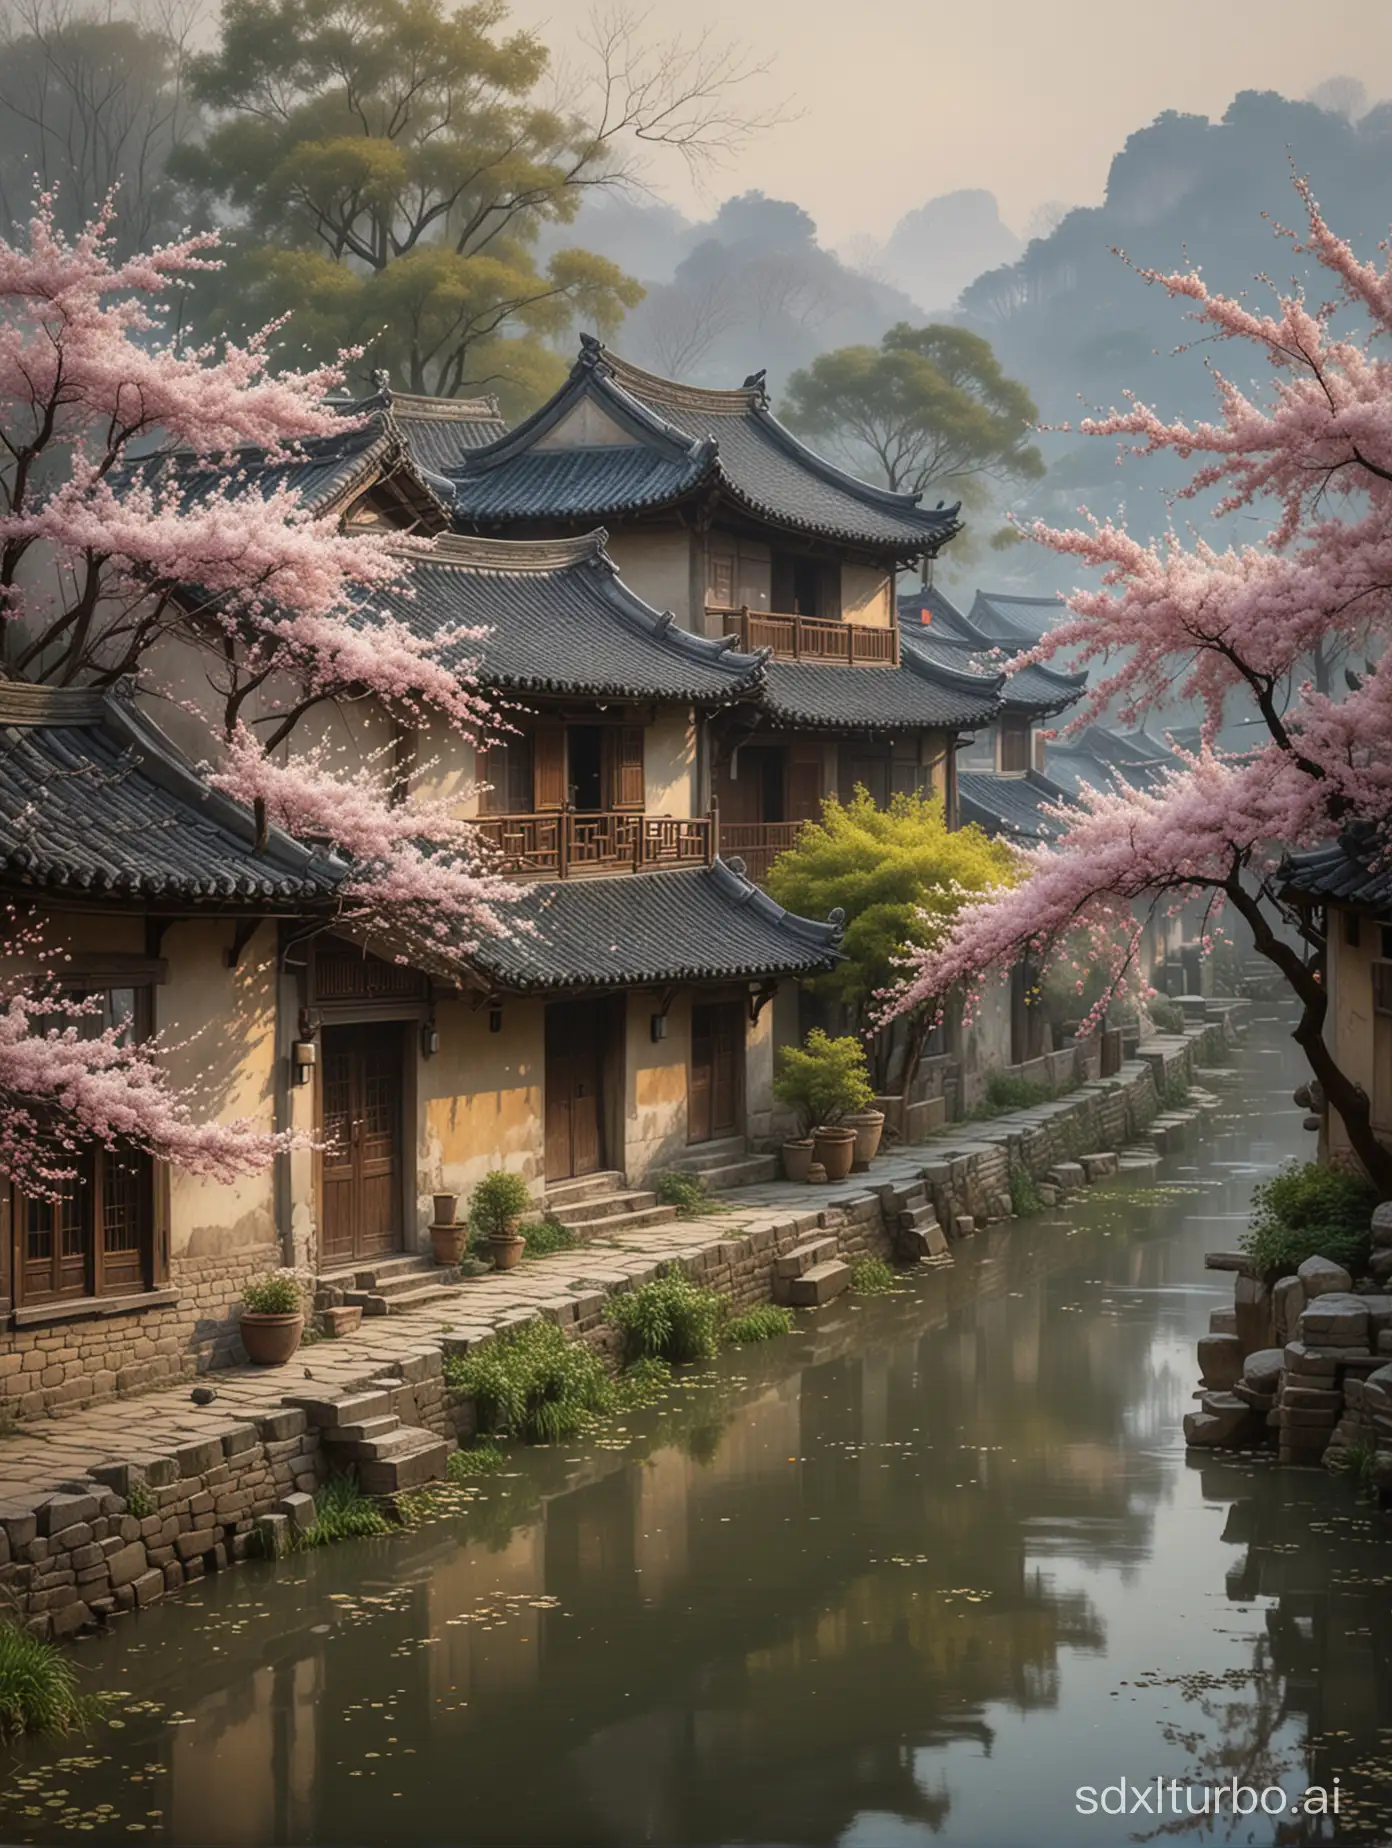 Tranquil-Rural-Scene-Blossoms-and-Stone-House-in-Wuzhen